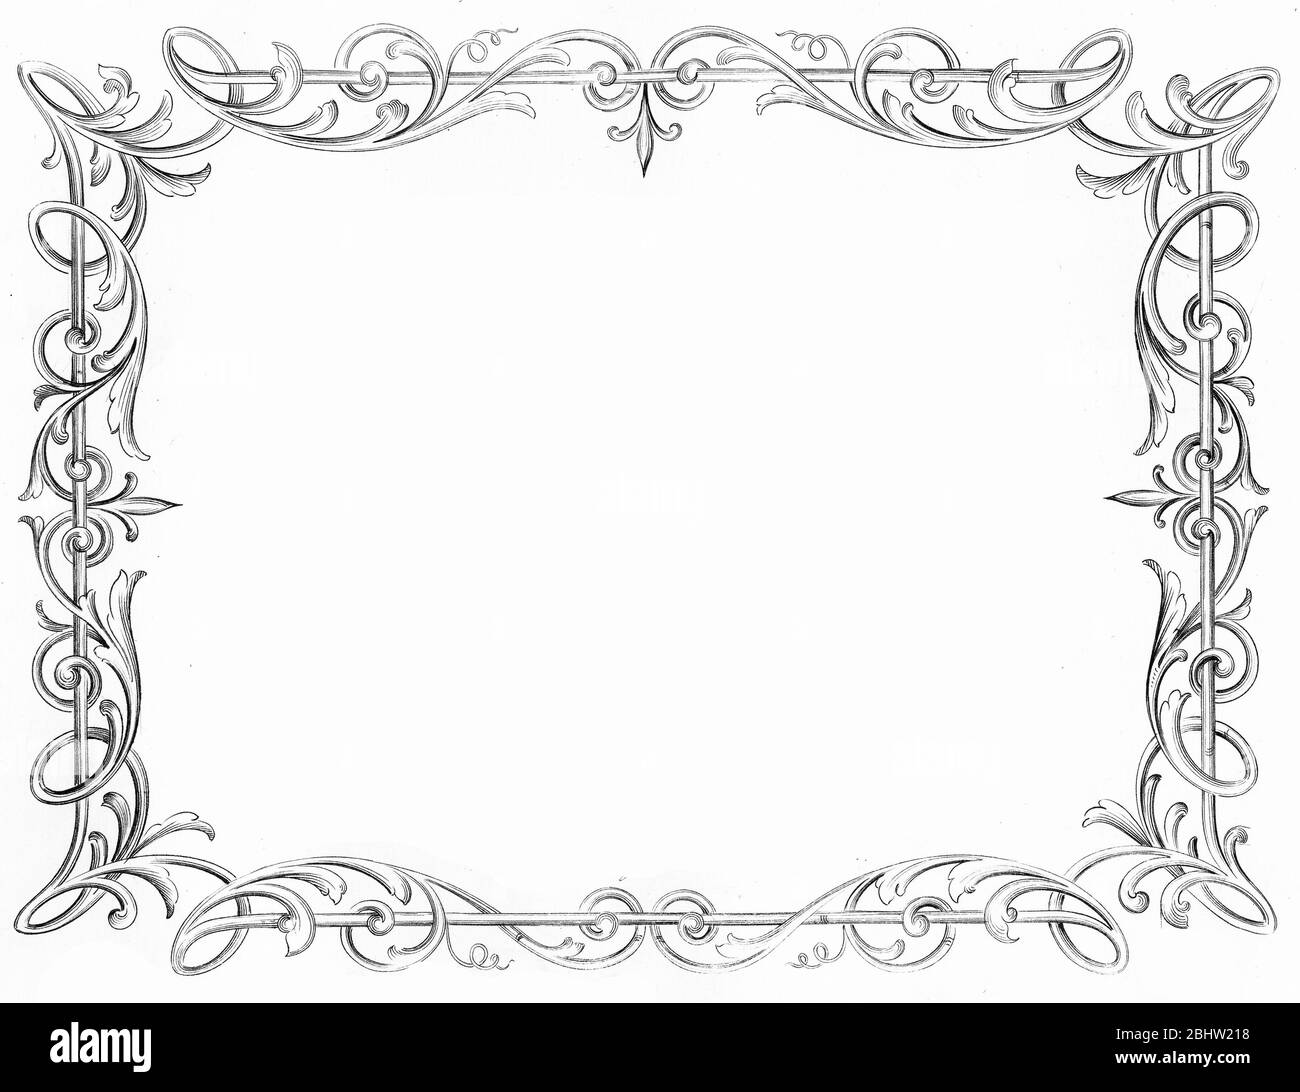 Engraving of a decorative border from the Victoria era Stock Photo